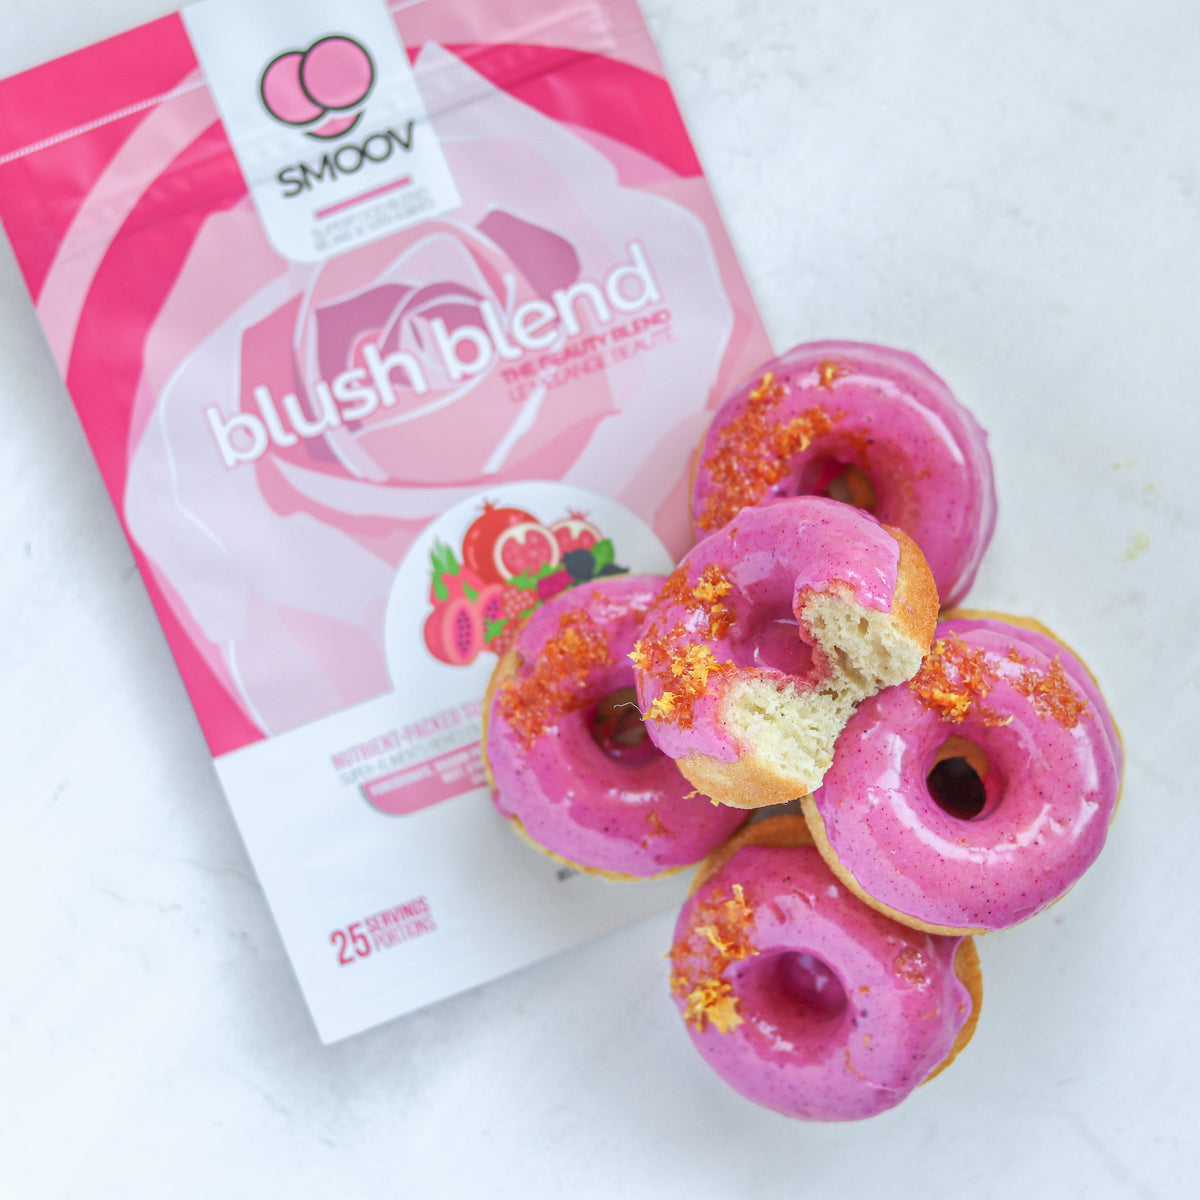 Blush Blend - packed with skin-loving ingredients and a wide range of antioxidants for skin, hair and heart health and is sure to satisfy your sweet tooth